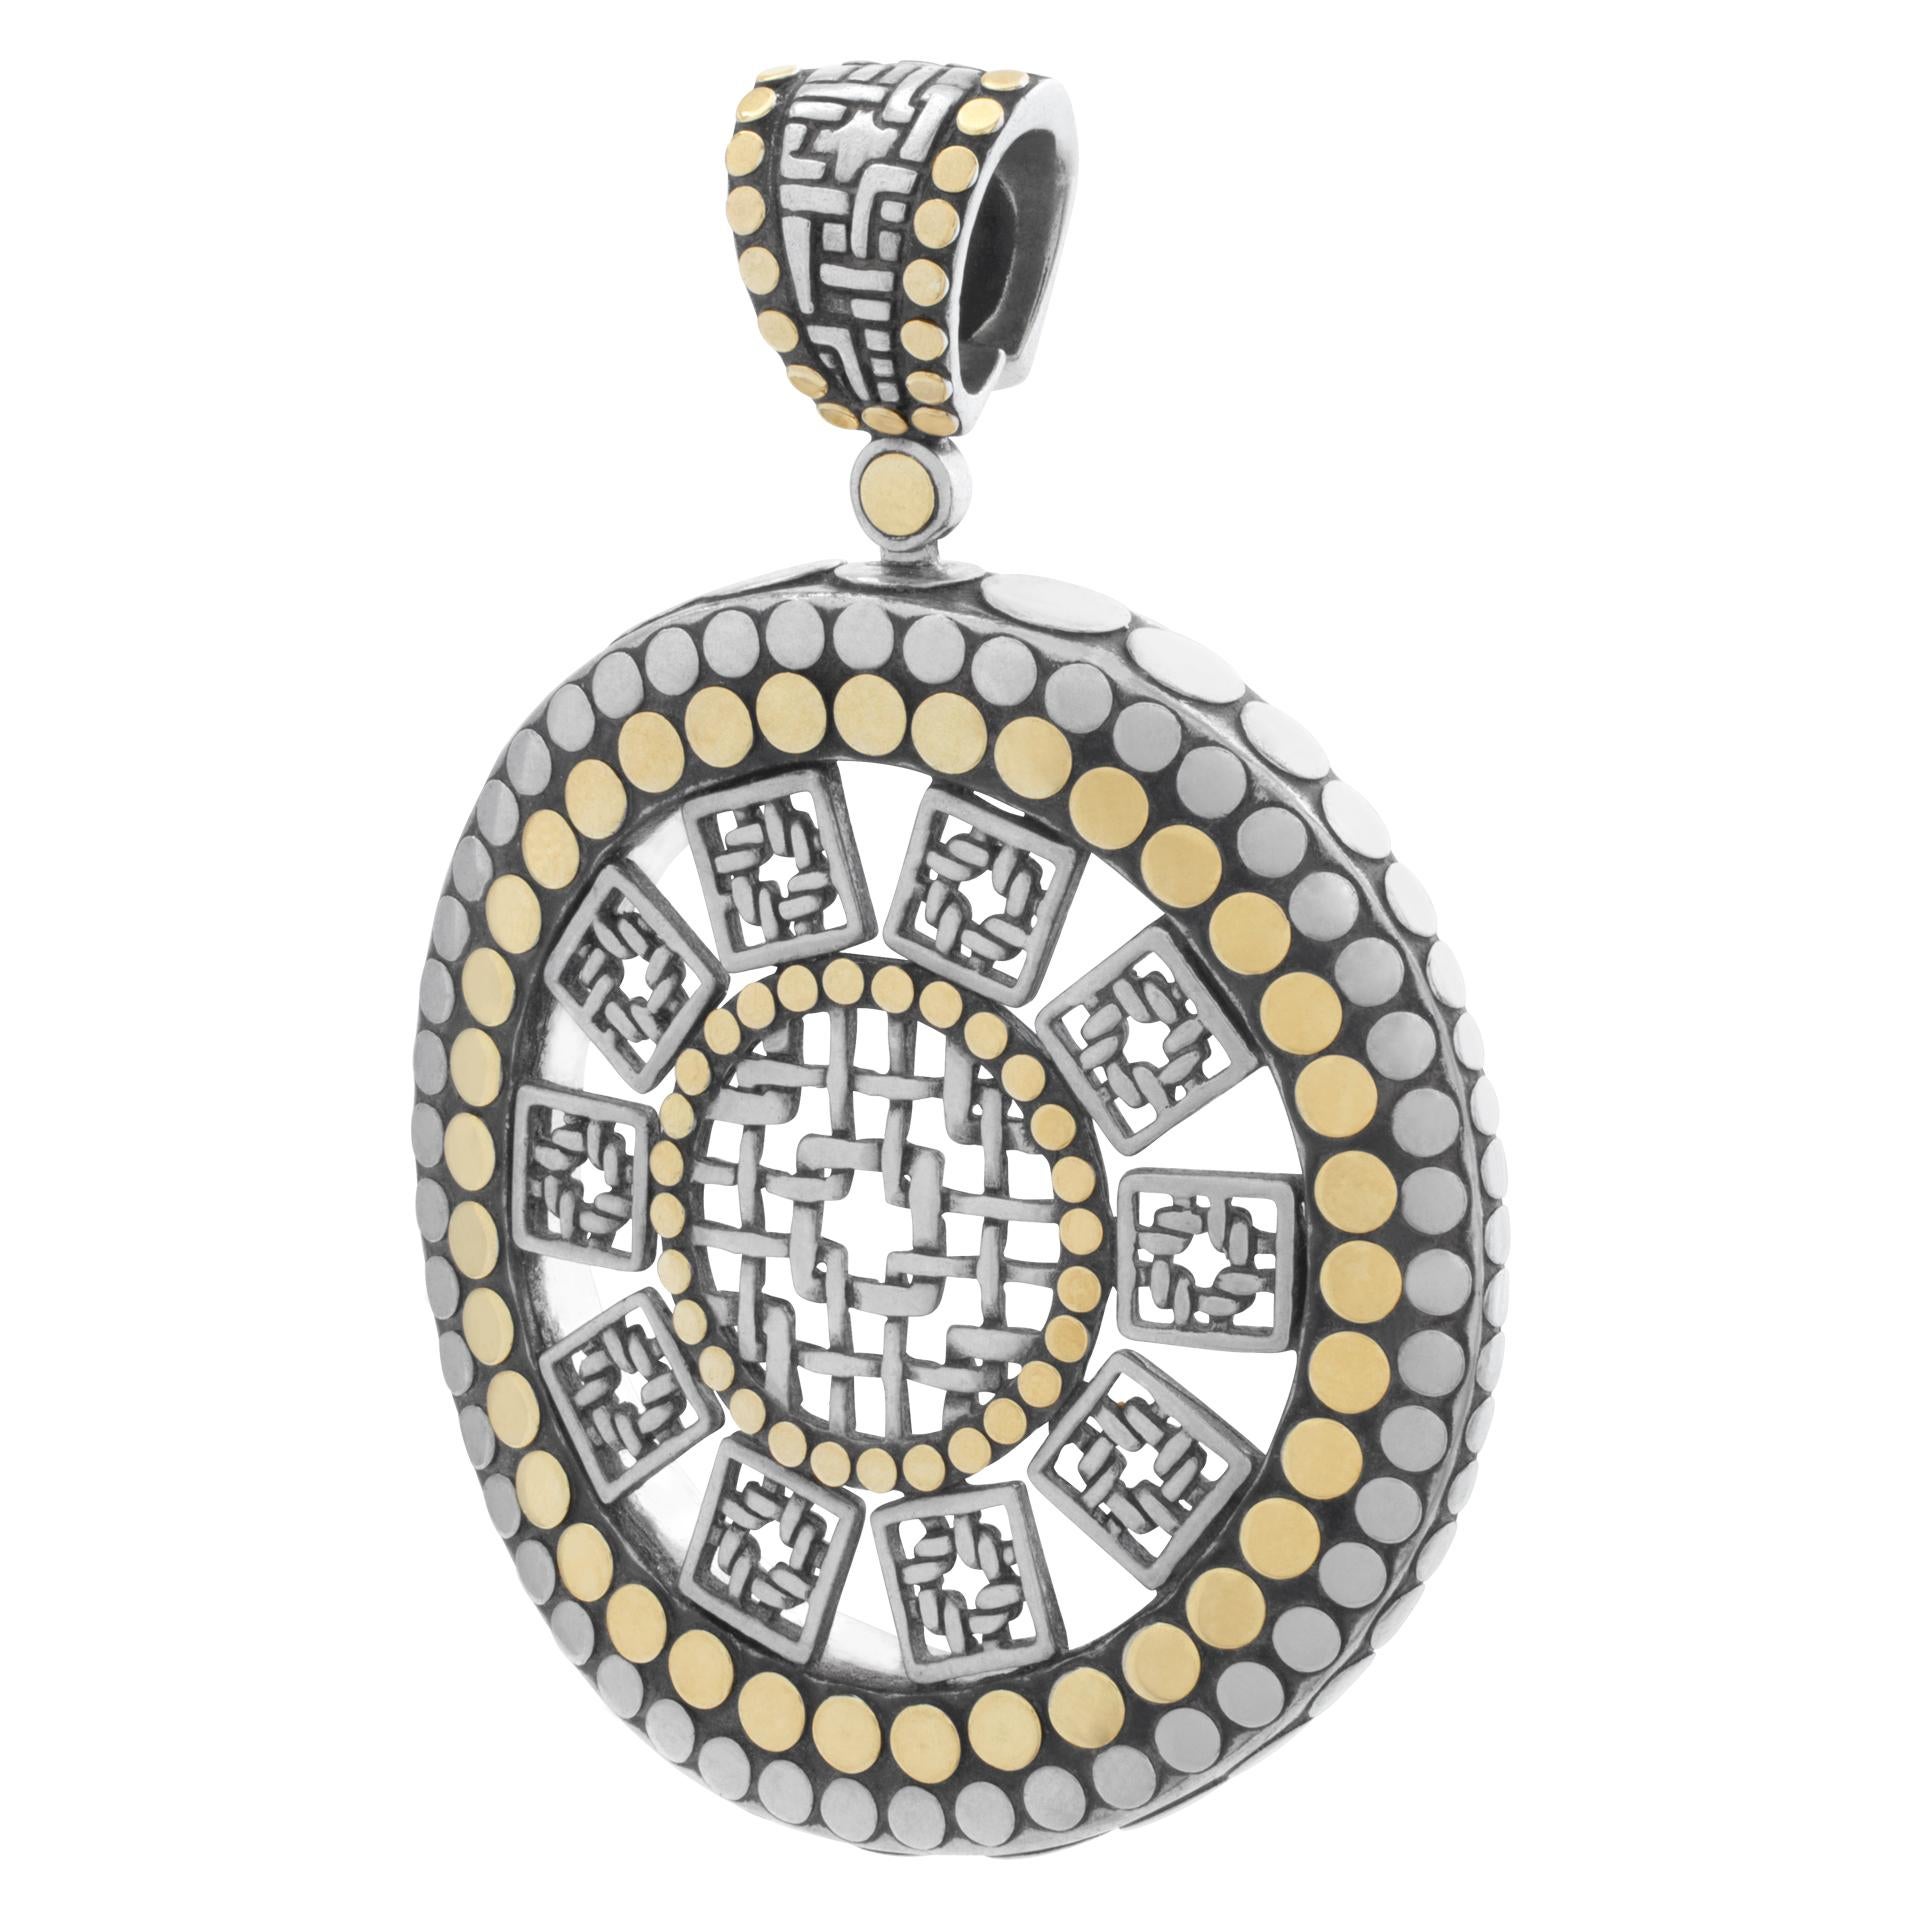 John Hardy large dot pendant in sterling silver and 18k yellow gold. 56 mm x 54 mm. Hinged bale for easy wear.
